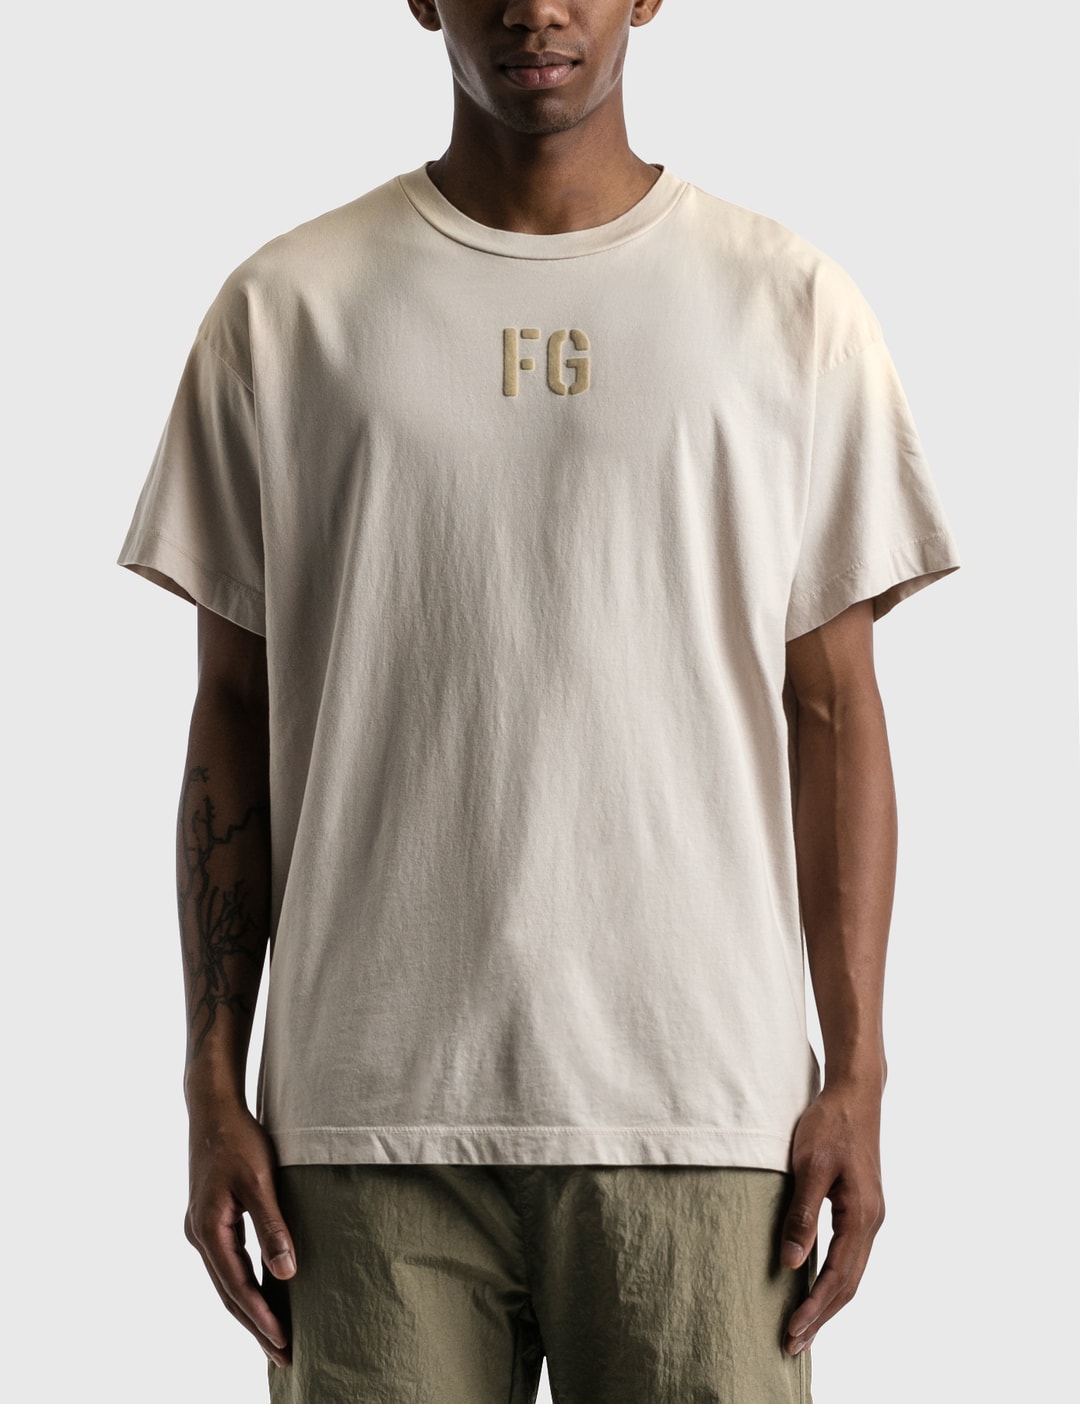 hastighed Modsætte sig Grænseværdi Fear of God - FG T-shirt | HBX - Globally Curated Fashion and Lifestyle by  Hypebeast